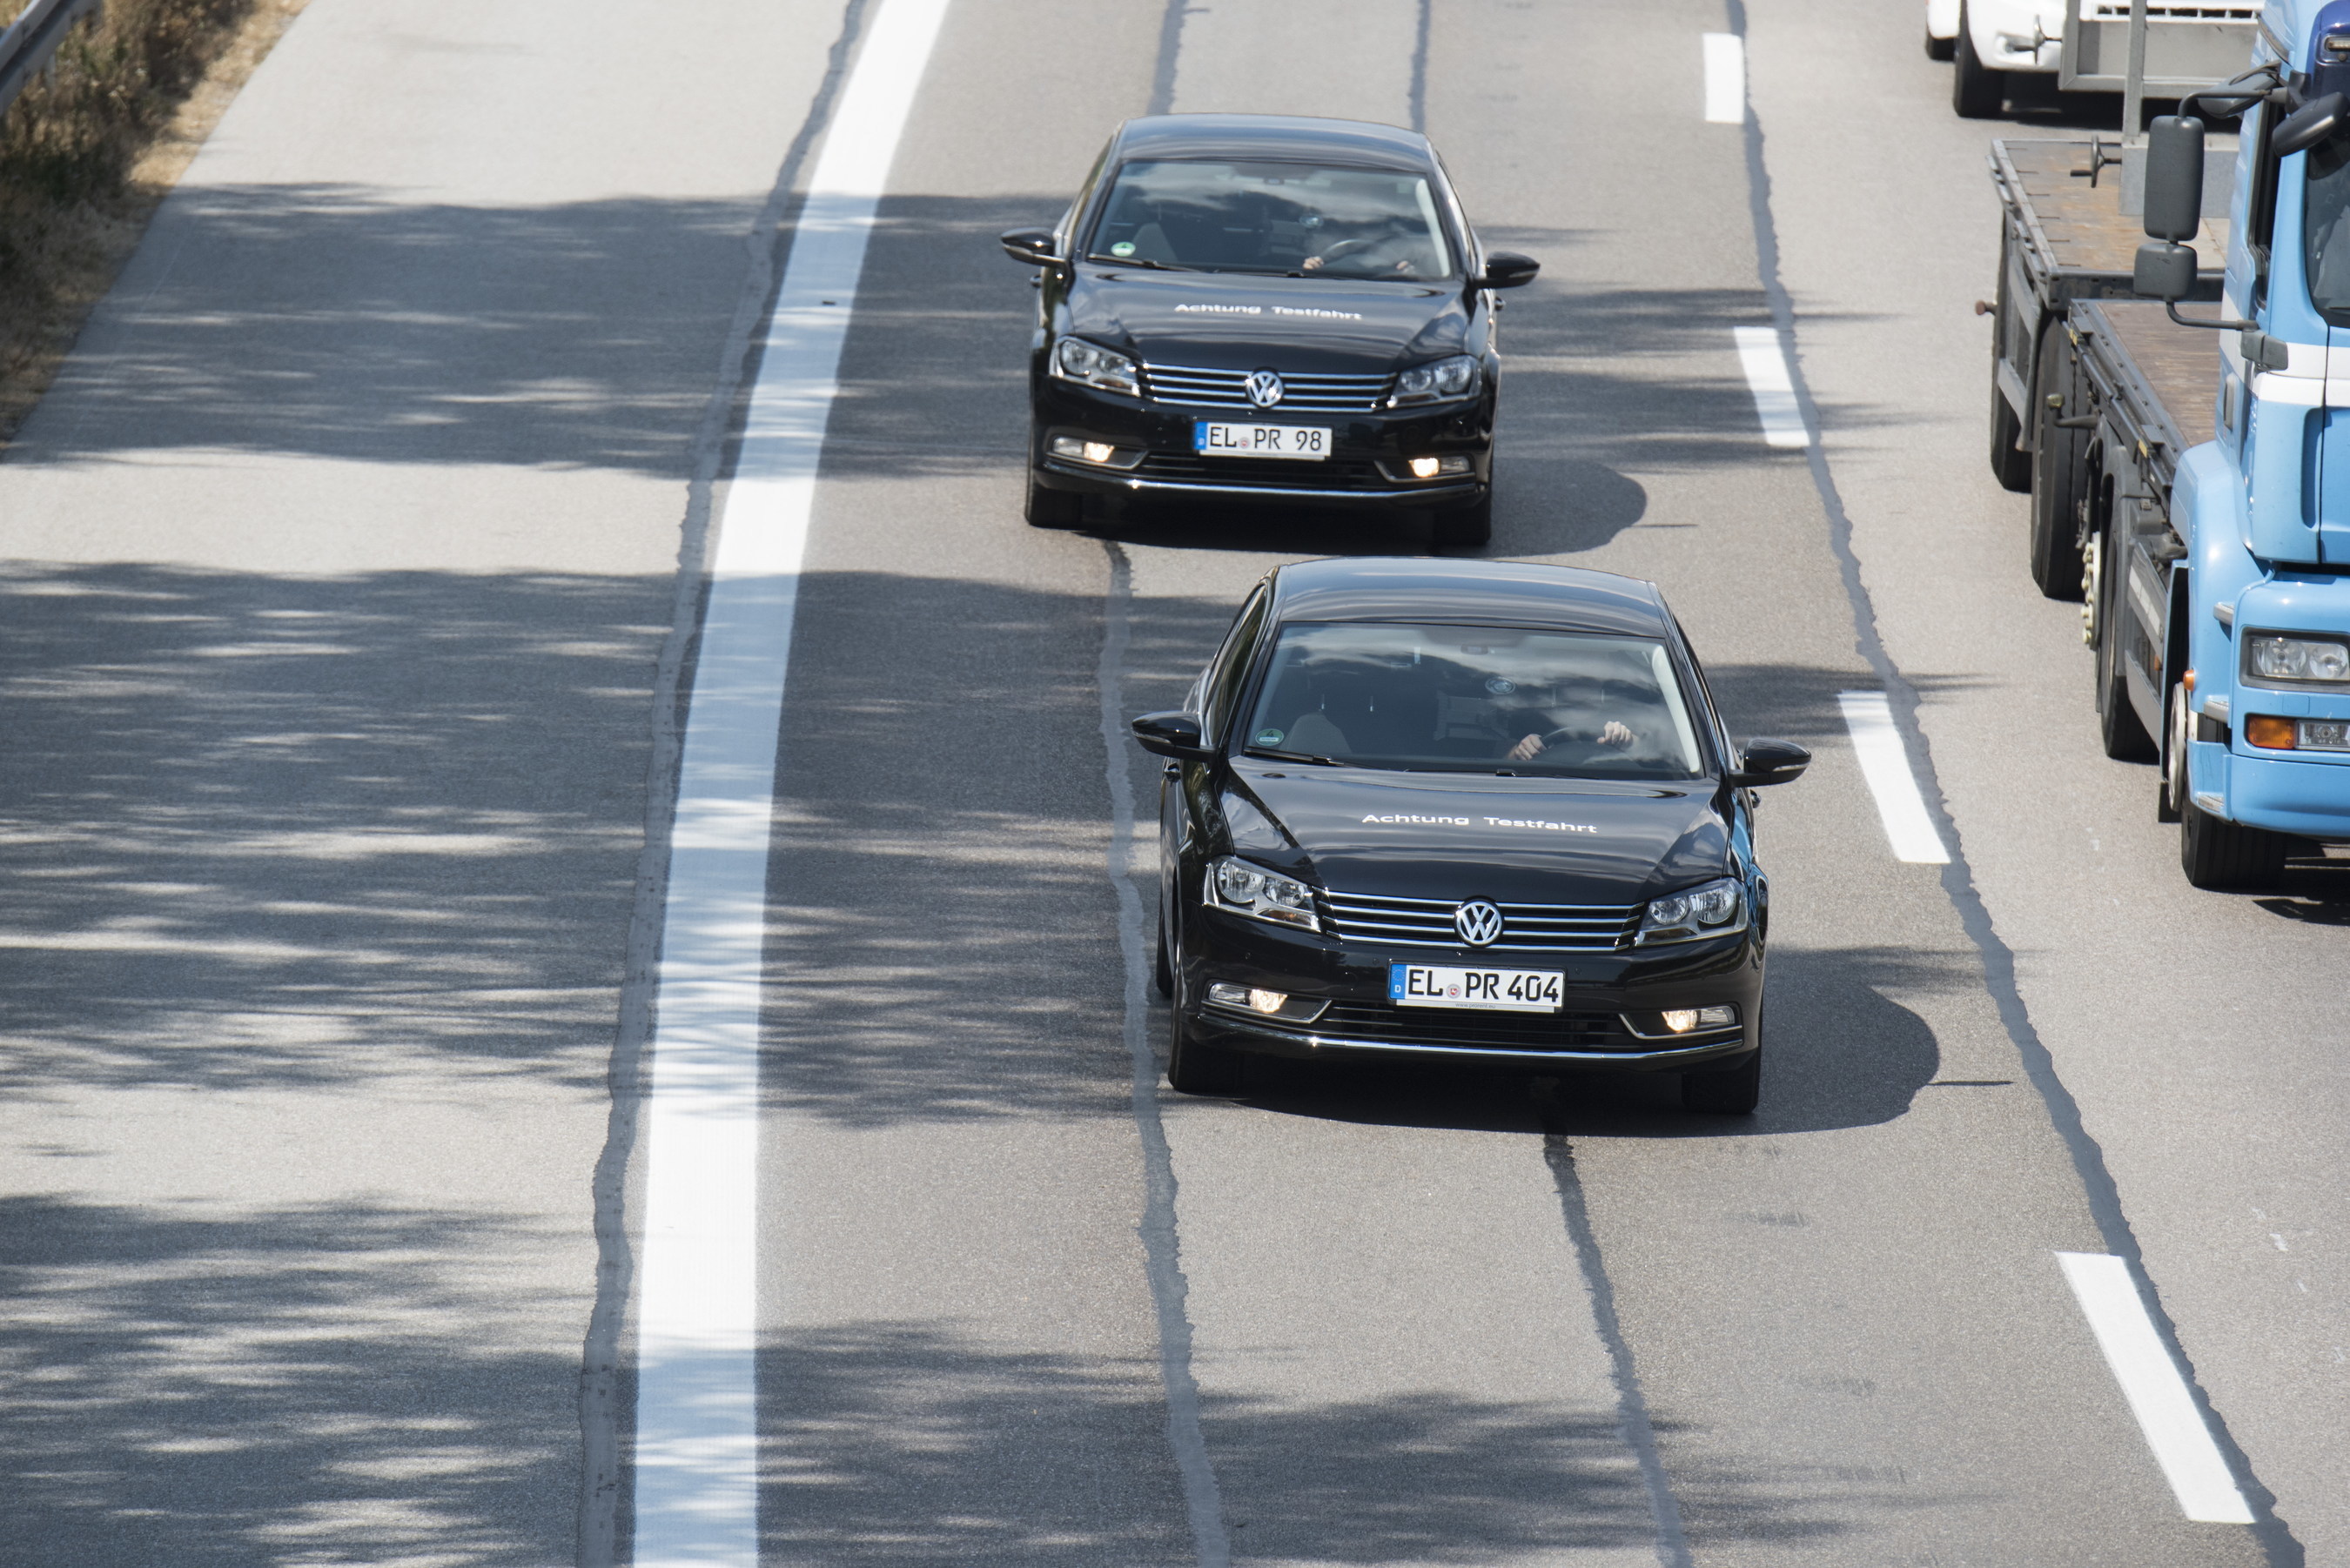 Continental, Deutsche Telekom, Fraunhofer ESK, and Nokia Networks Show First Safety Applications at "digital A9 motorway test bed." Editorial use only in direct correlation with Deutsche Telekom AG. (PRNewsFoto/Nokia Networks) (PRNewsFoto/Nokia Networks)